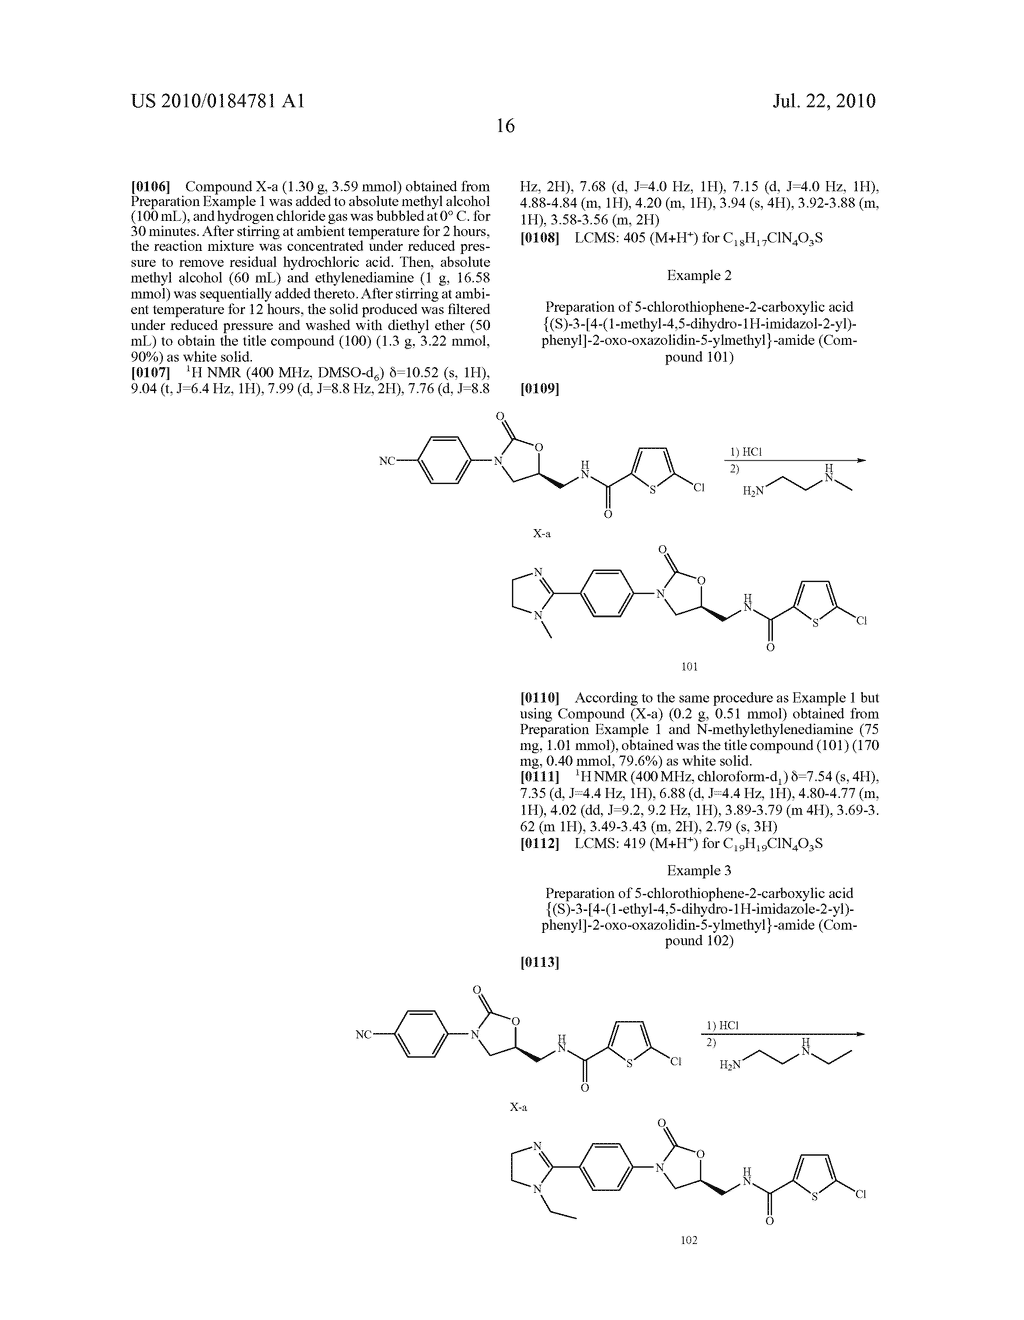 FXA INHIBITORS WITH CYCLIC AMIDINES AS P4 SUBUNIT, PROCESSES FOR THEIR PREPARATIONS, AND PHARMACEUTICAL COMPOSITIONS AND DERIVATIVES THEREOF - diagram, schematic, and image 18